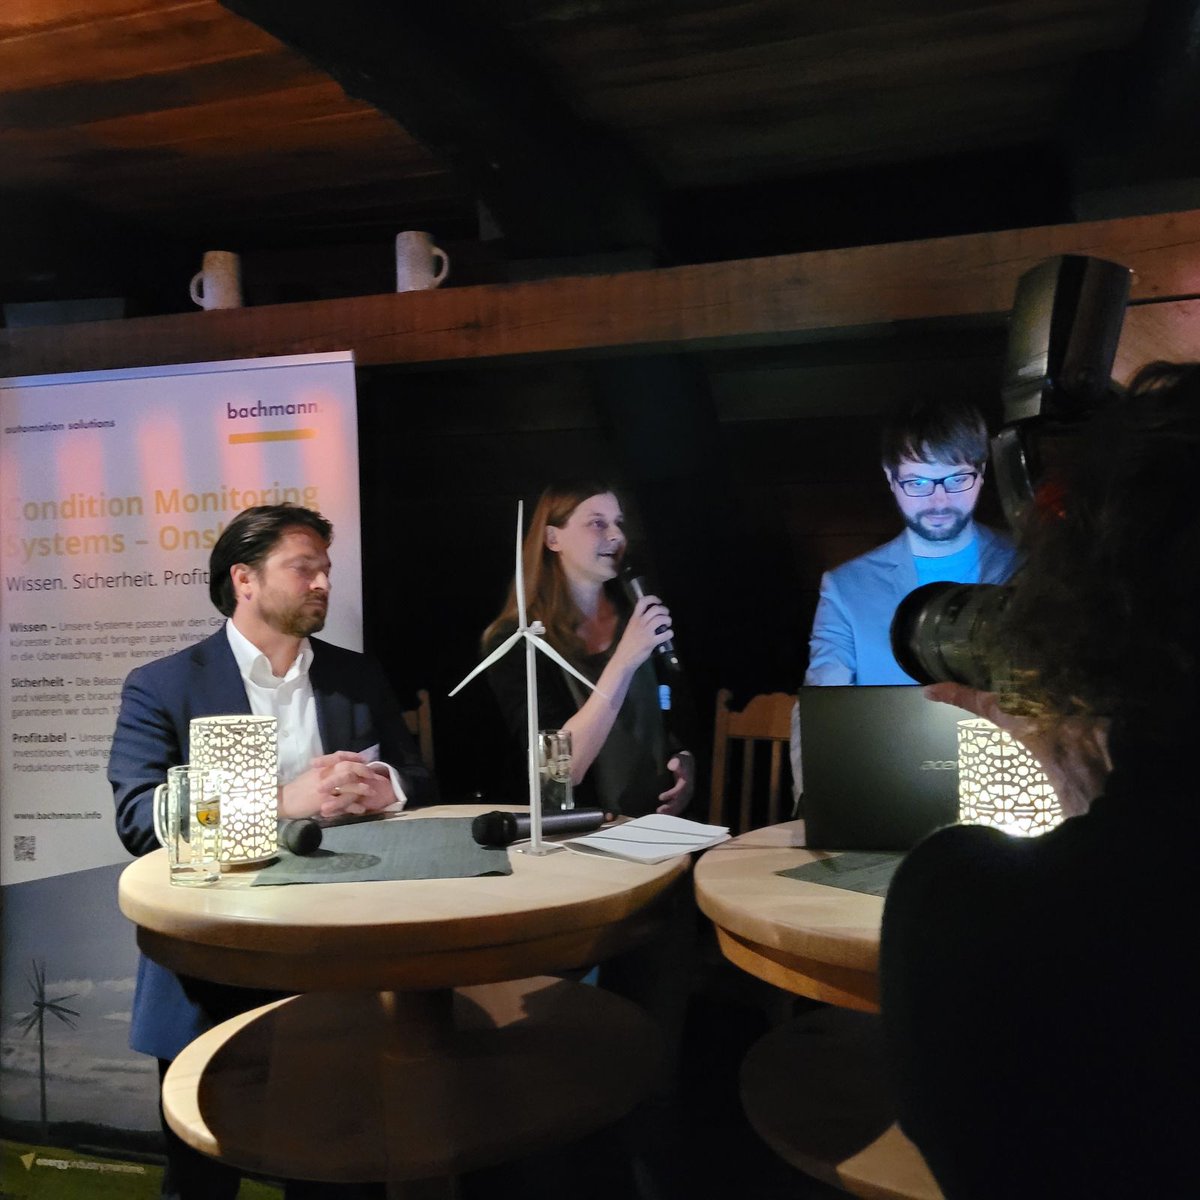 Reflecting on a great day at the 13th Hasewind Stammtisch. Check out some highlights from the event! #HasewindStammtisch #CommunityEngagement #RenewableFuture @hasewind